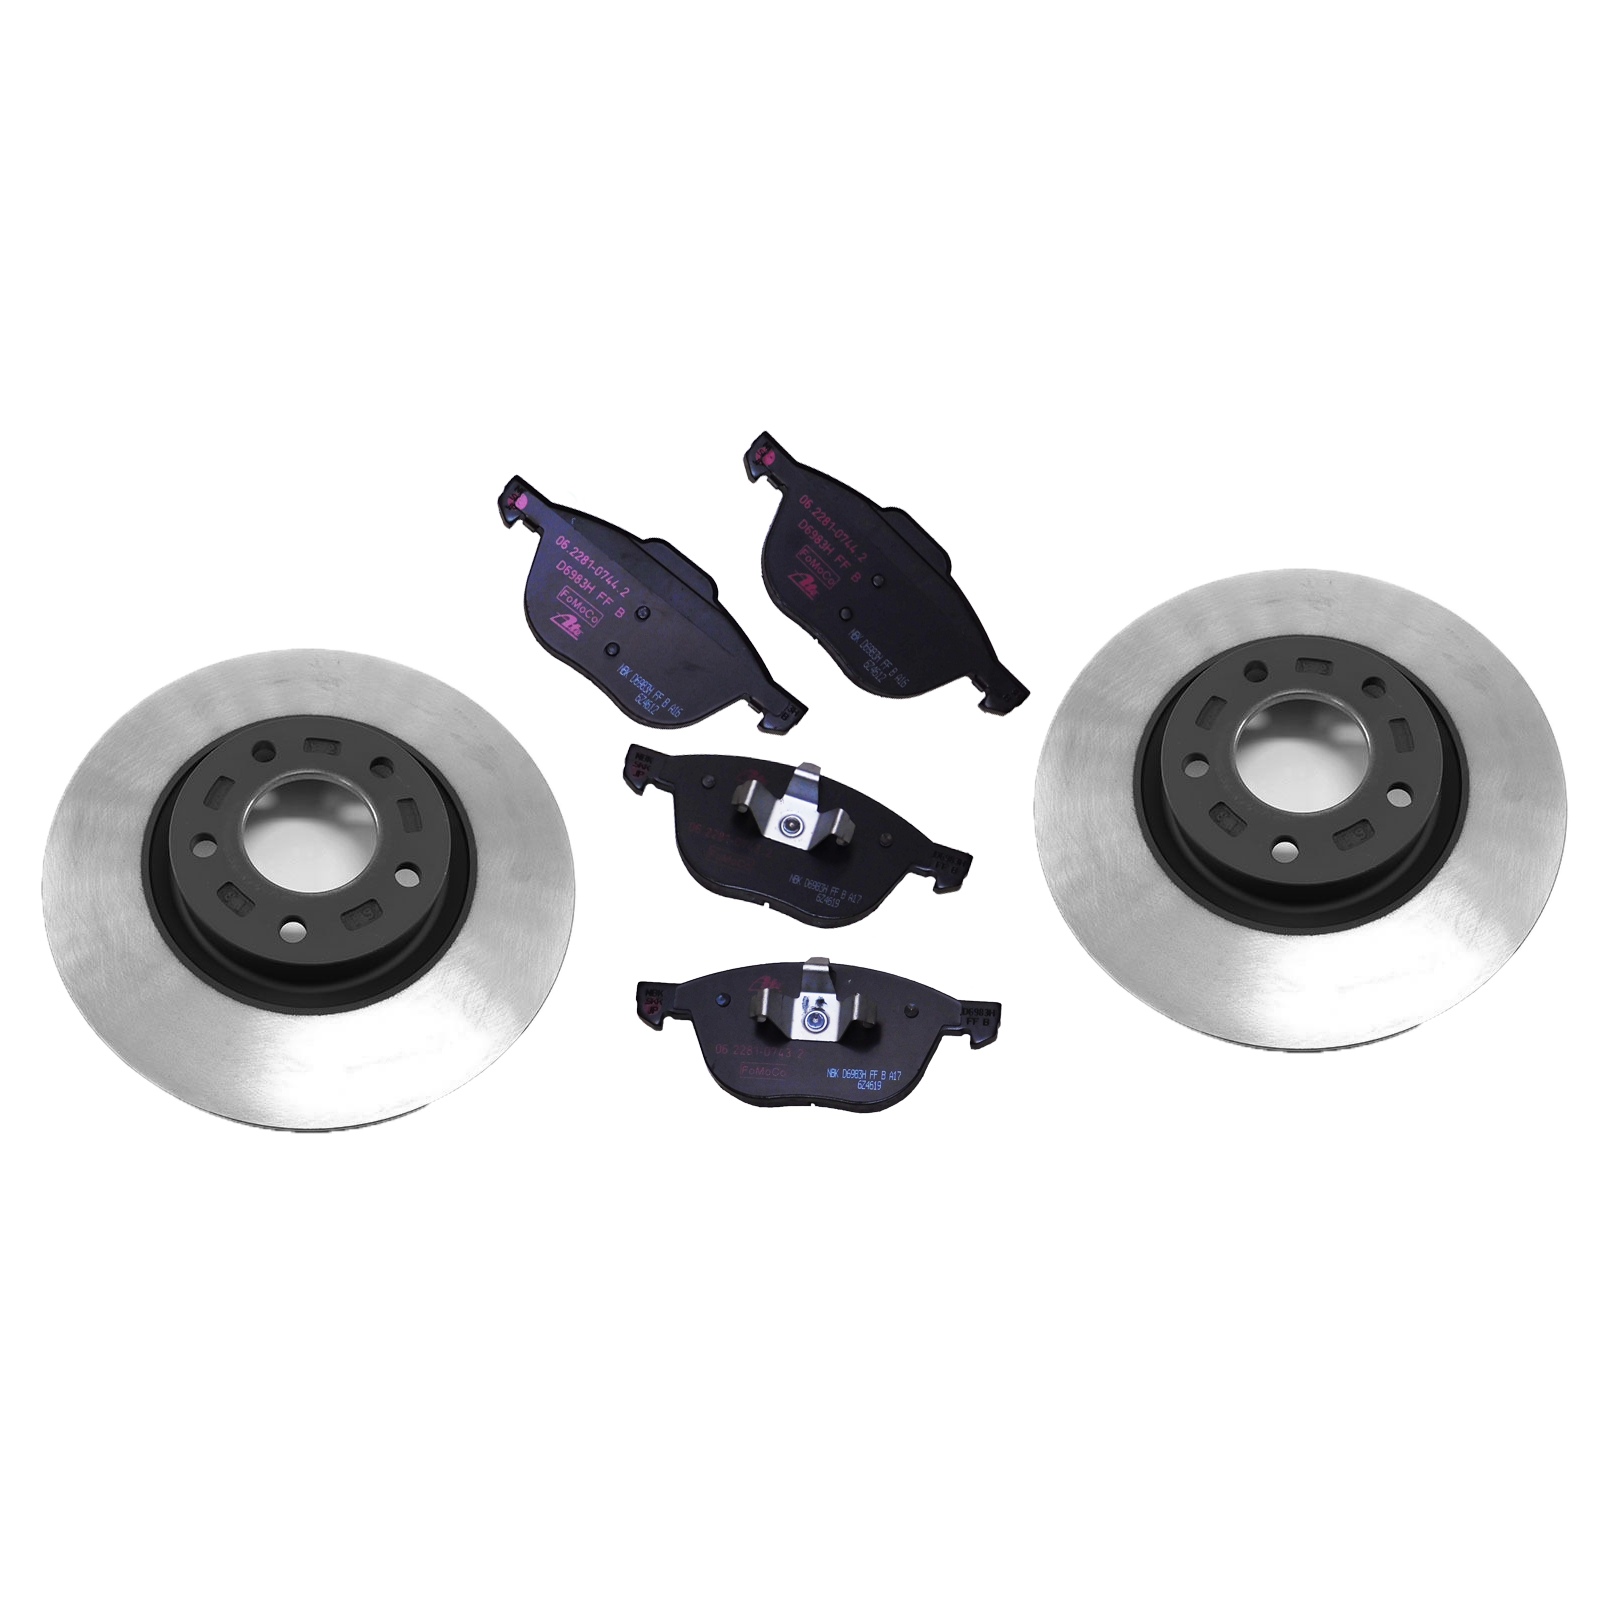 Front Brake Package: Pads, Rotors & Attachment Kit | Mazda CX-5 (2013-2016)